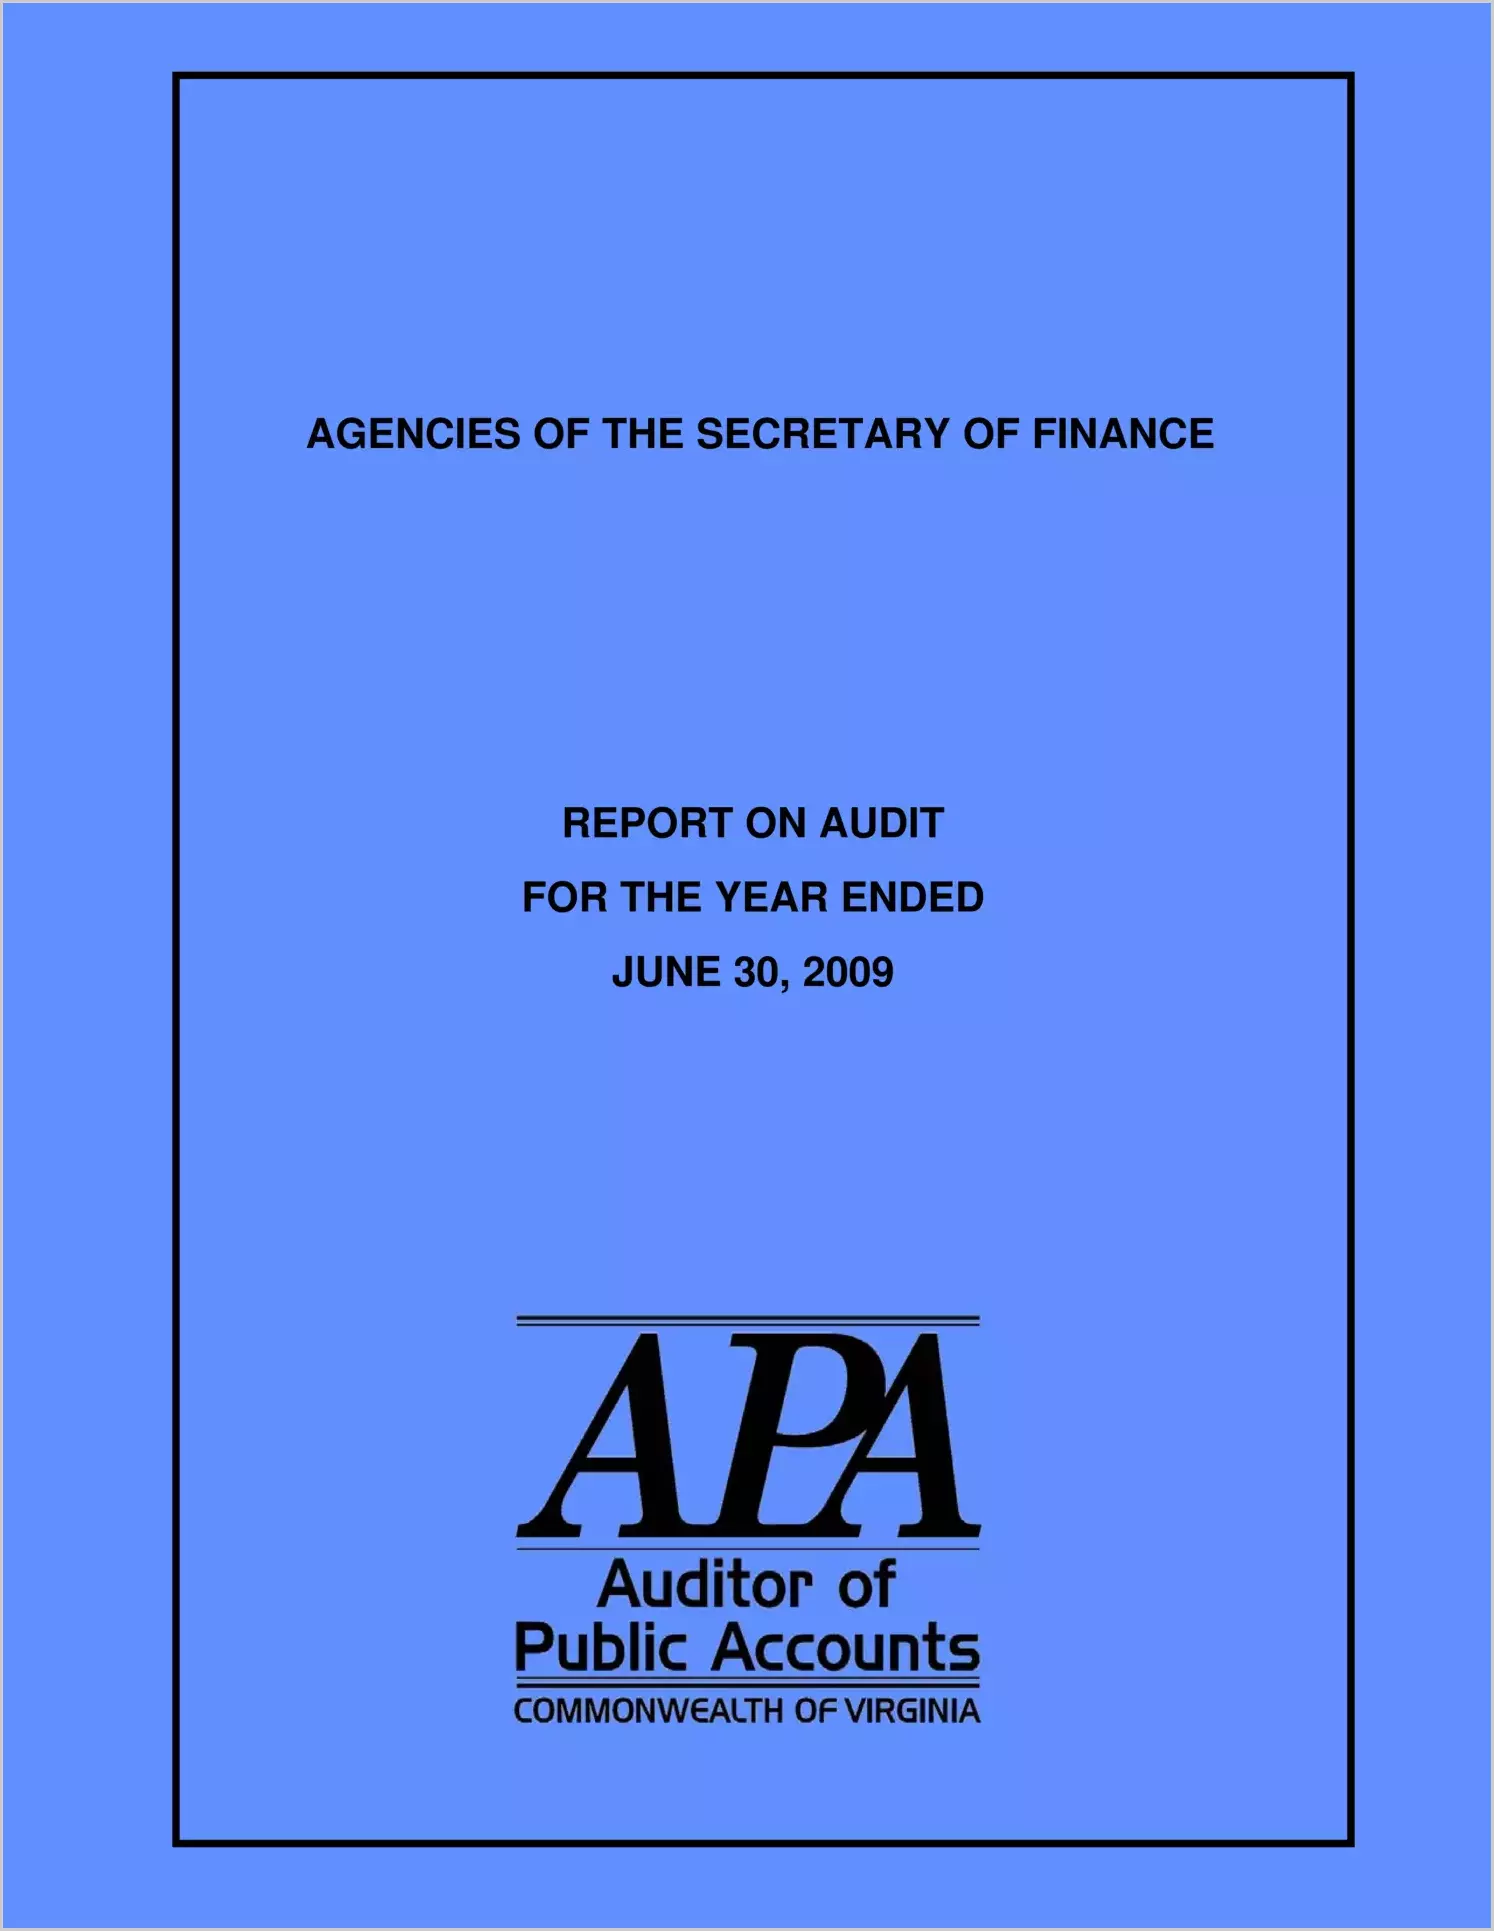 Agencies of the Secretary of Finance report on audit for the year ended June 30, 2009